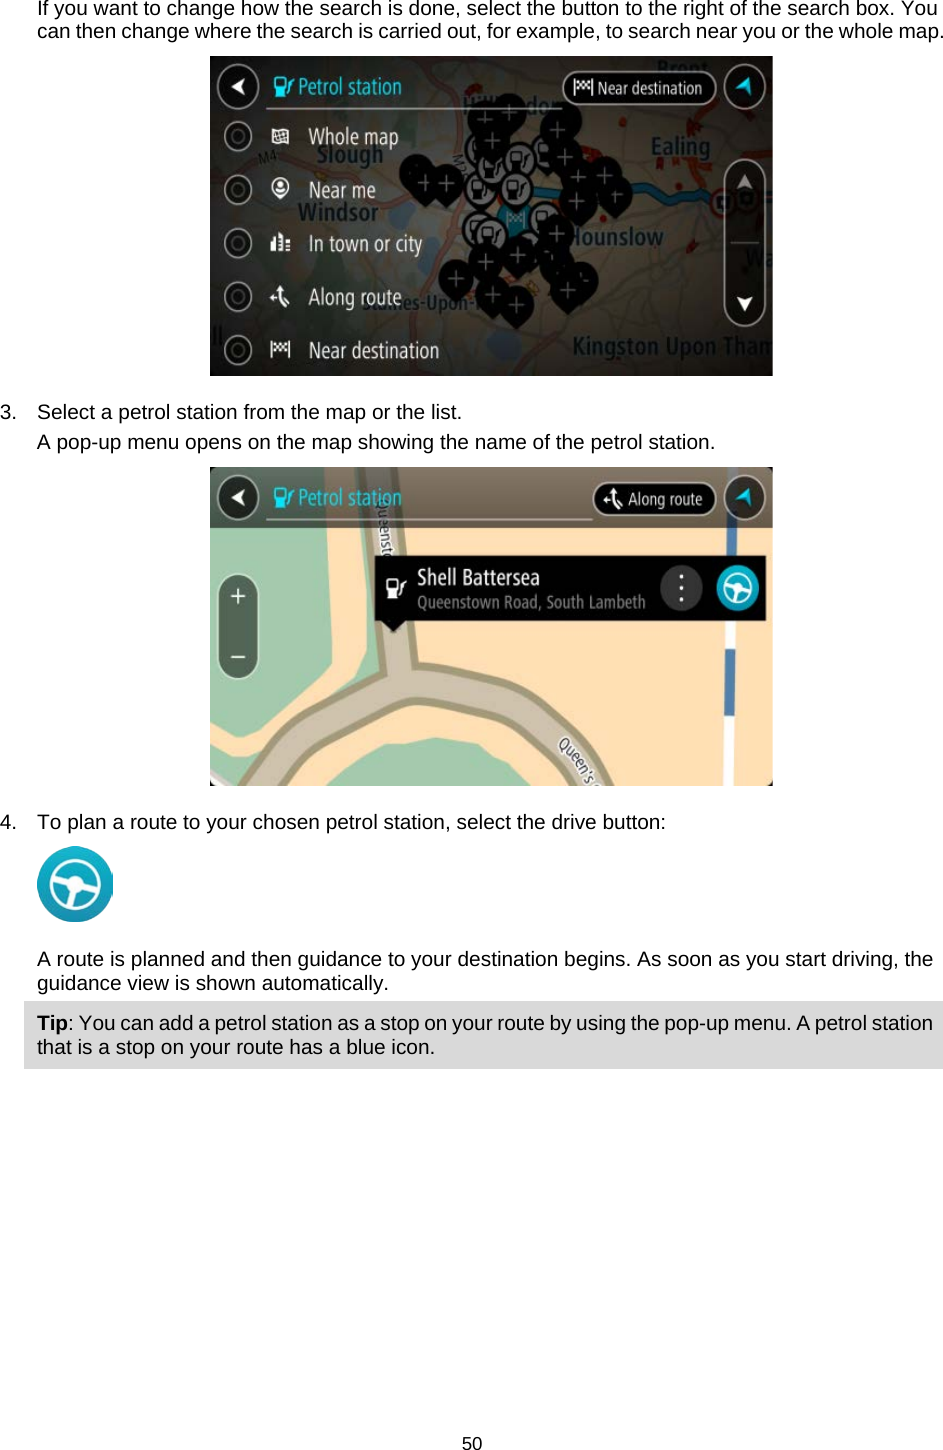  If you want to change how the search is done, select the button to the right of the search box. You can then change where the search is carried out, for example, to search near you or the whole map.    3. Select a petrol station from the map or the list. A pop-up menu opens on the map showing the name of the petrol station.  4. To plan a route to your chosen petrol station, select the drive button:  A route is planned and then guidance to your destination begins. As soon as you start driving, the guidance view is shown automatically. Tip: You can add a petrol station as a stop on your route by using the pop-up menu. A petrol station that is a stop on your route has a blue icon. 50   